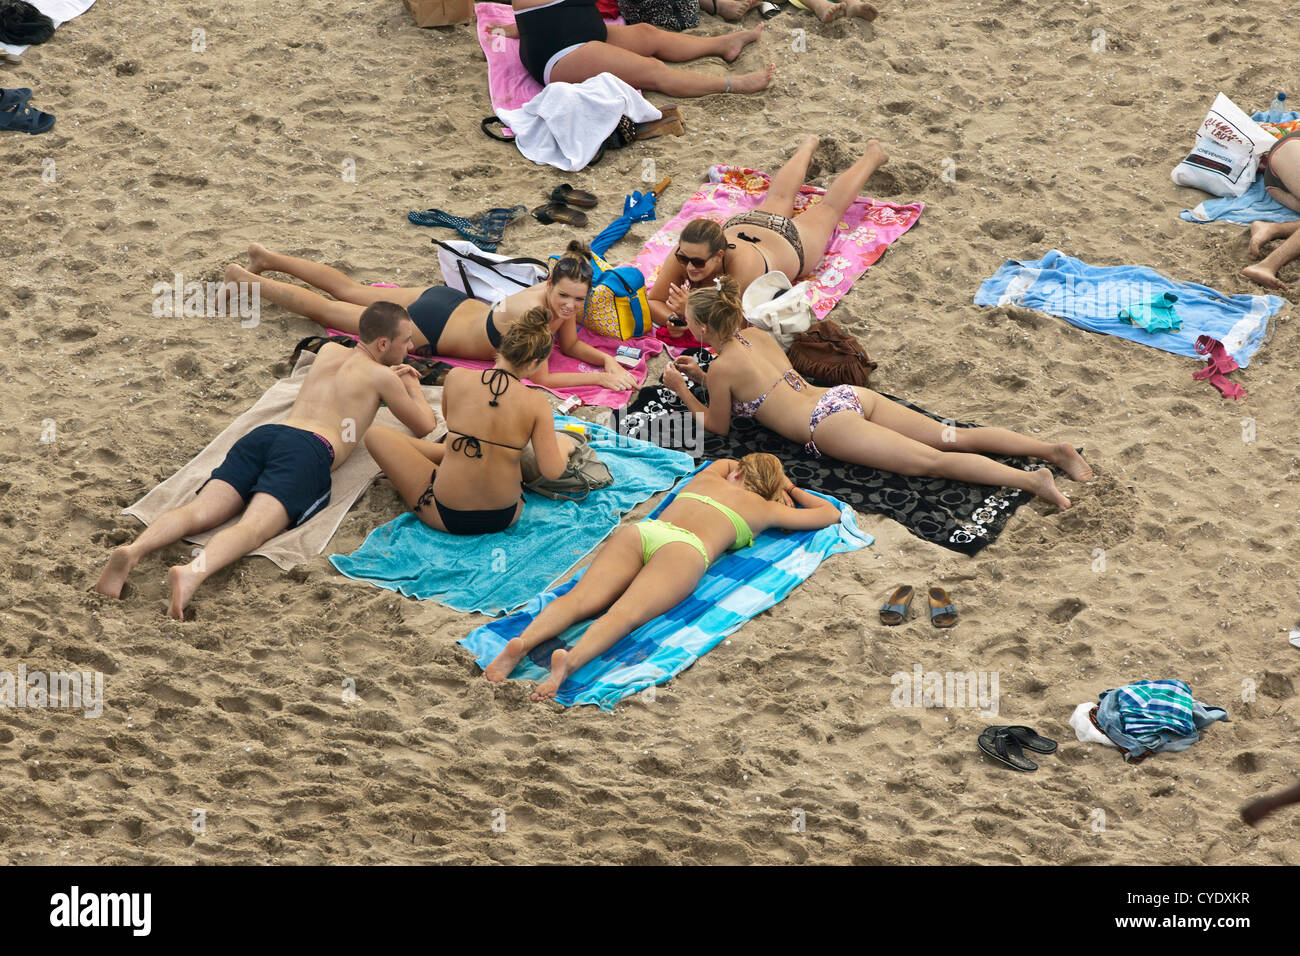 The Netherlands, Scheveningen, near The Hague or in Dutch: Den Haag. Young people sunbathing on the beach. Aerial Stock Photo